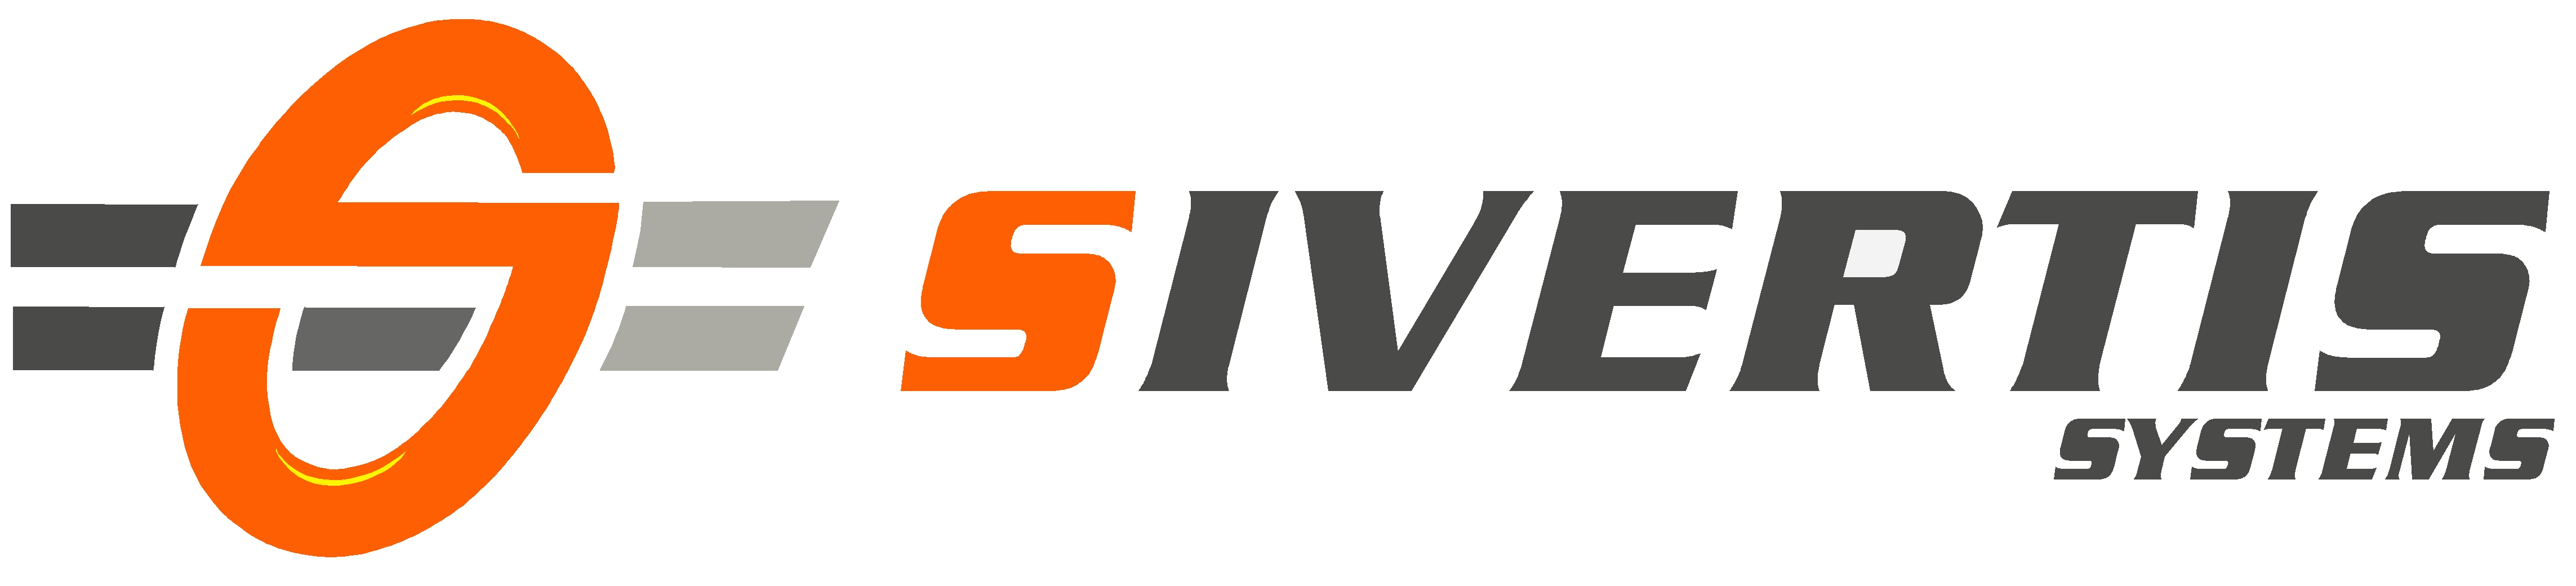 SIVERTIS SYSTEMS